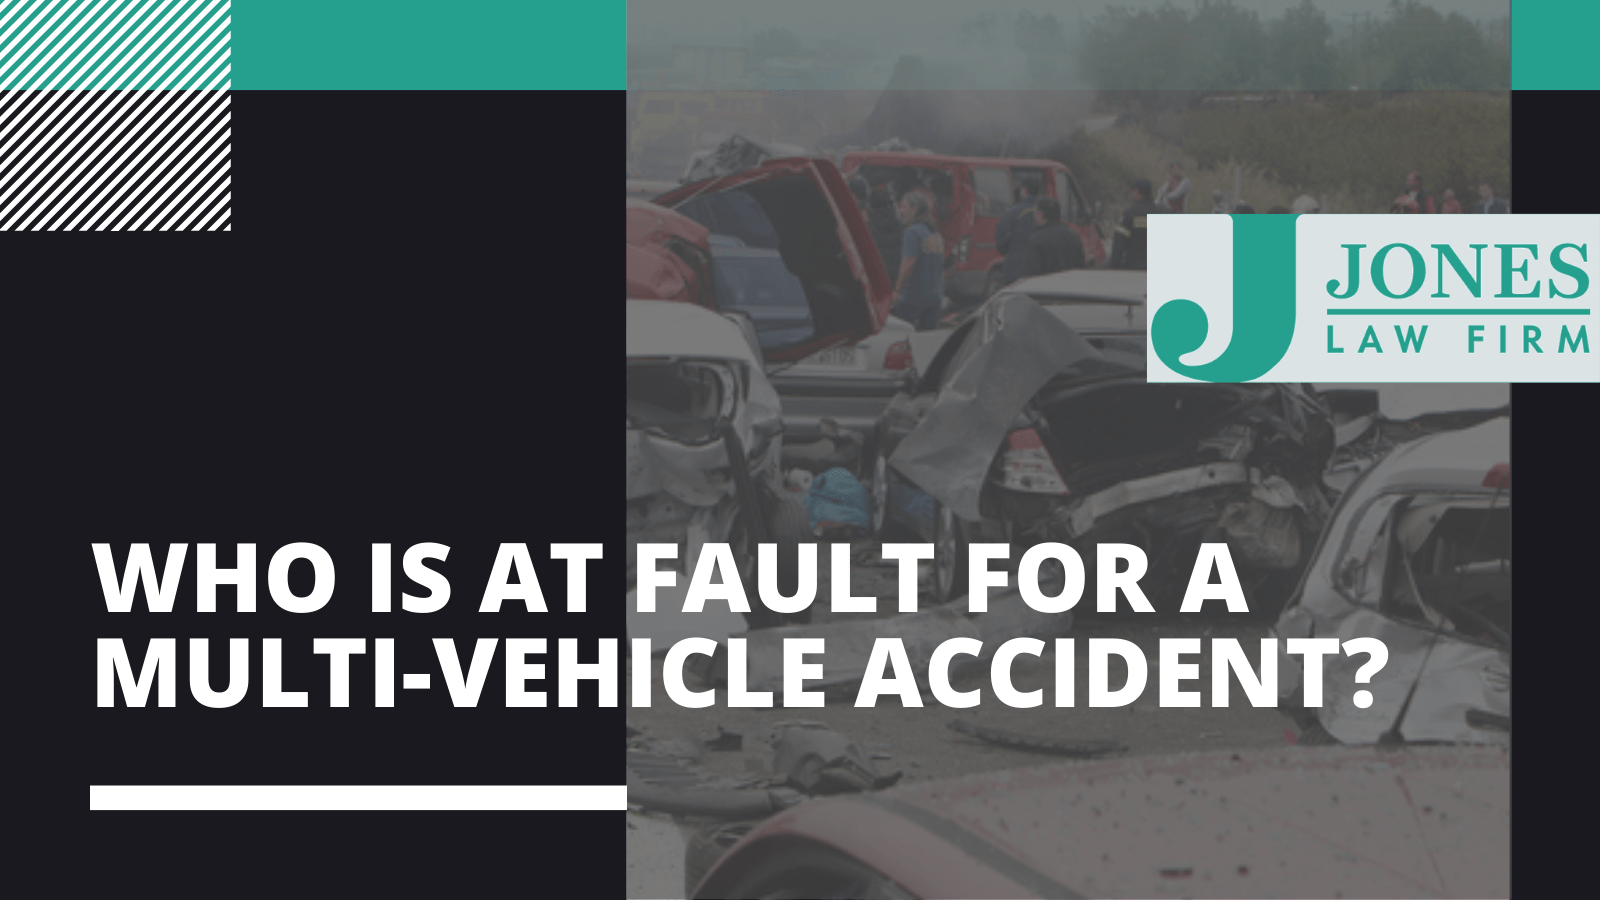 Who is at Fault for a Multi-vehicle Accident - Jones law firm - Alexandria louisiana